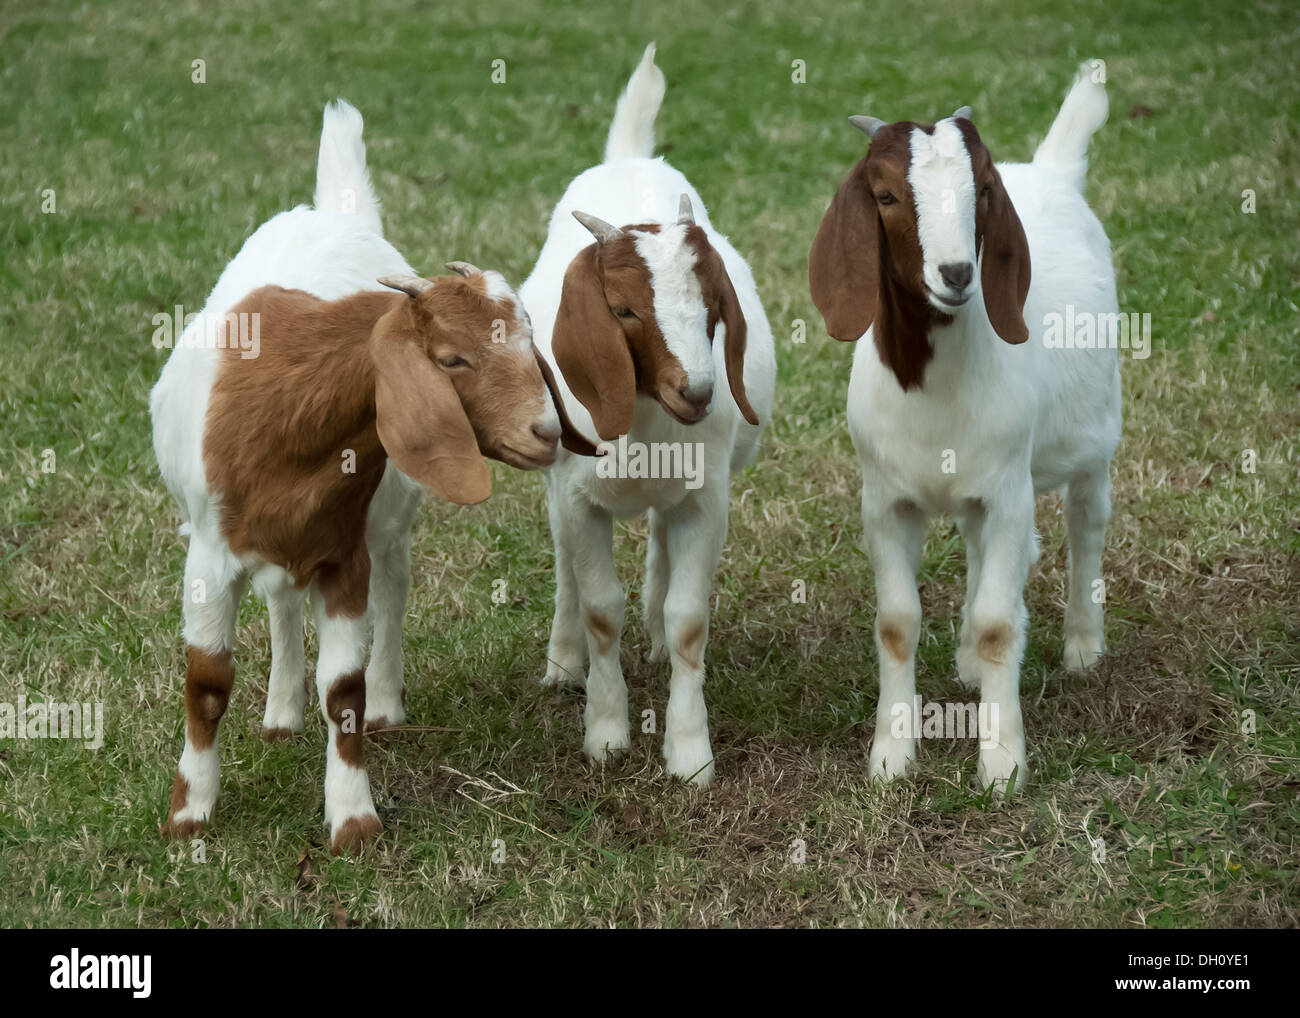 These three goats look like they are talking to each other. Stock Photo